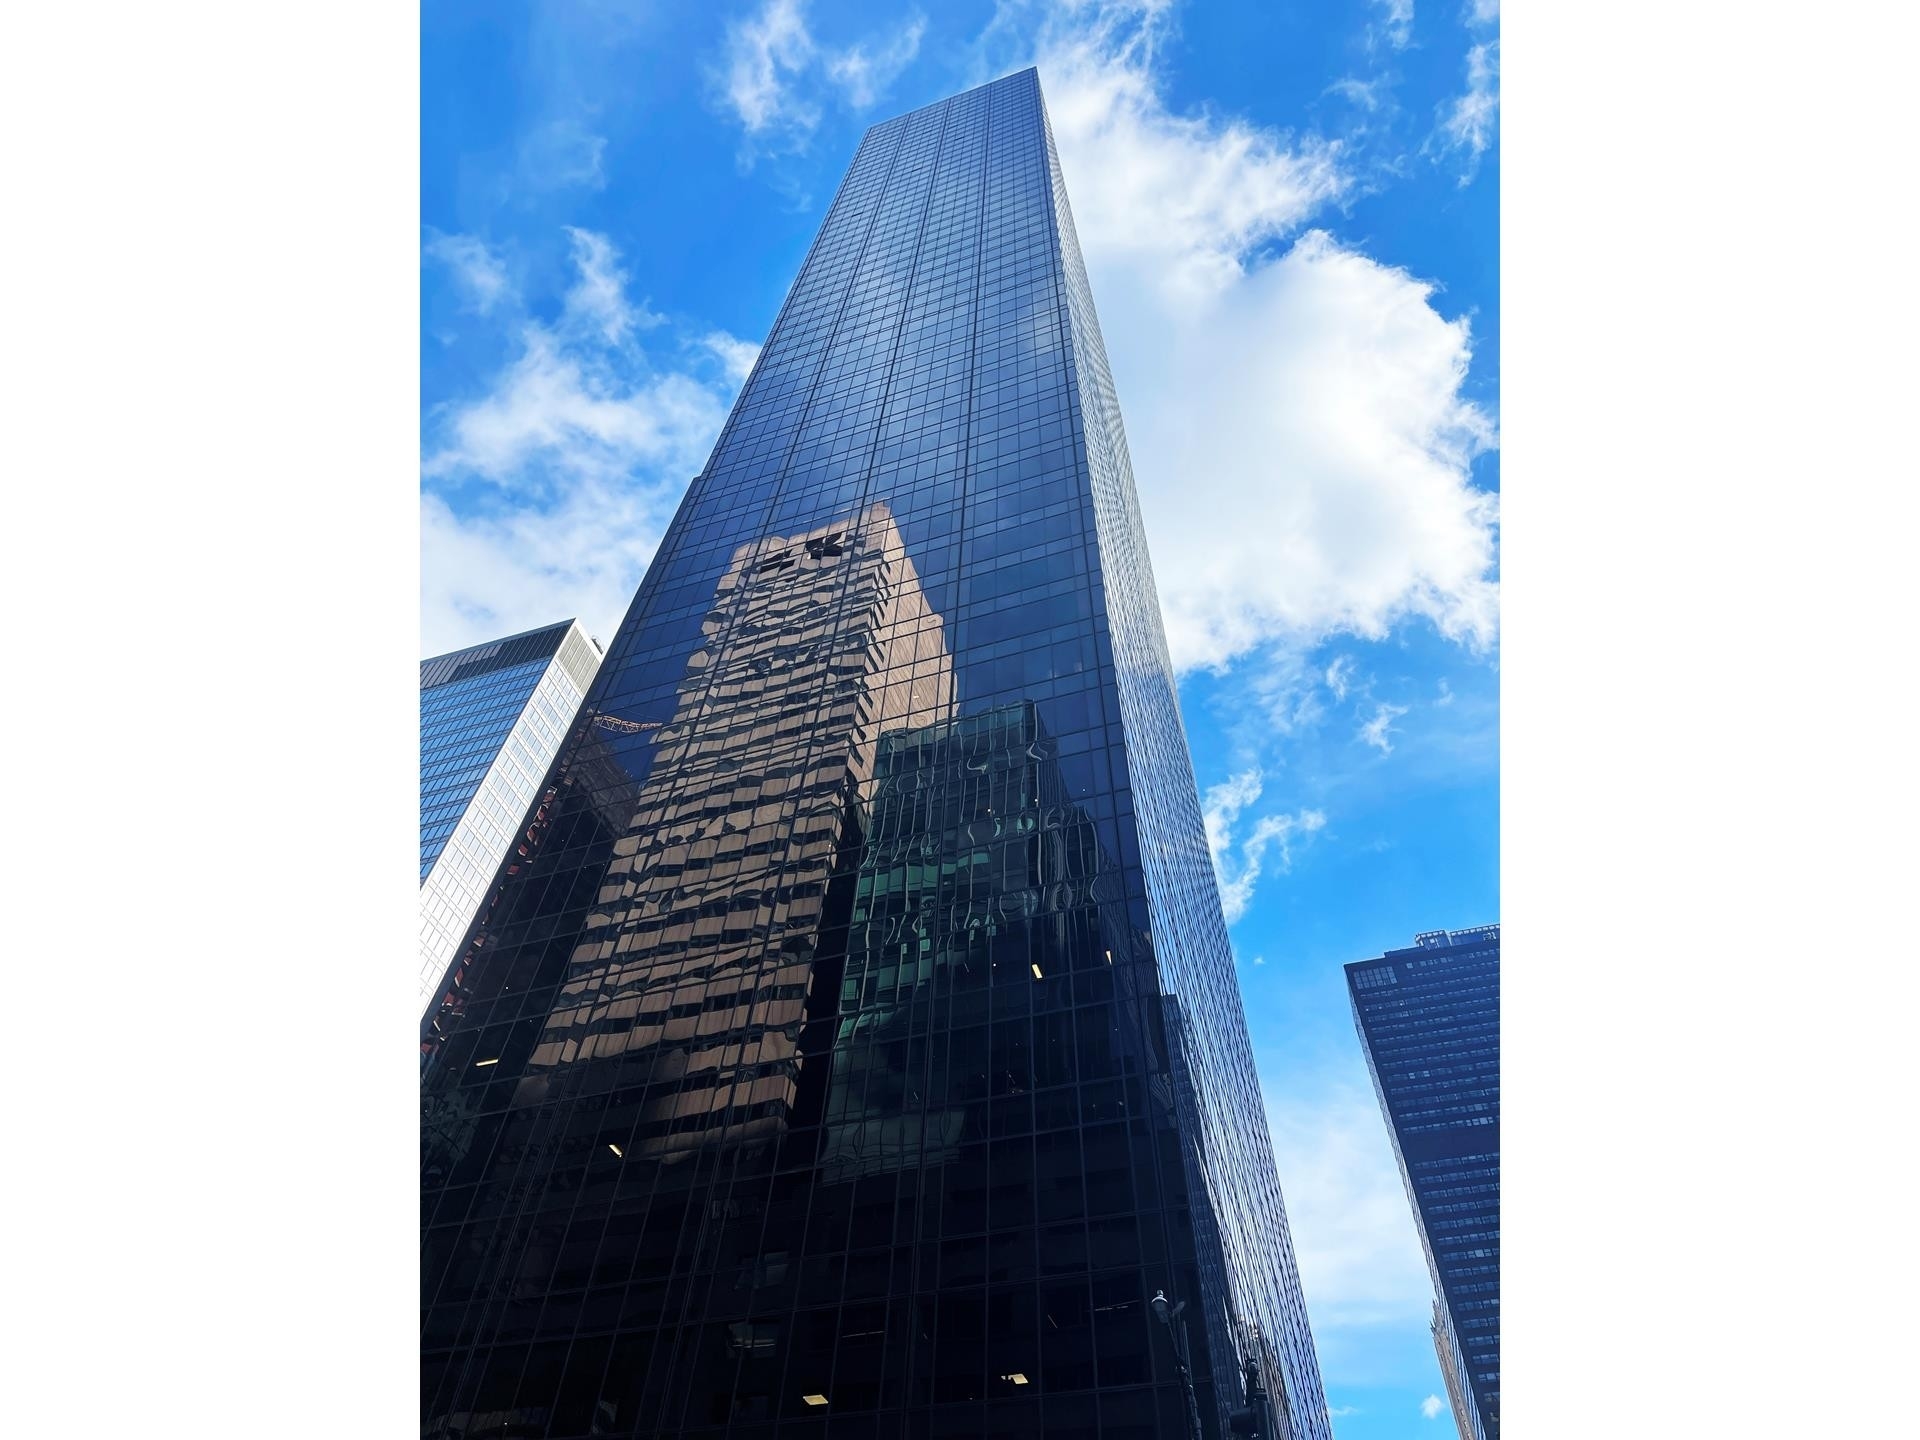 16. Condominiums for Sale at Olympic Tower, 641 FIFTH AVE , 23A Turtle Bay, New York, NY 10022